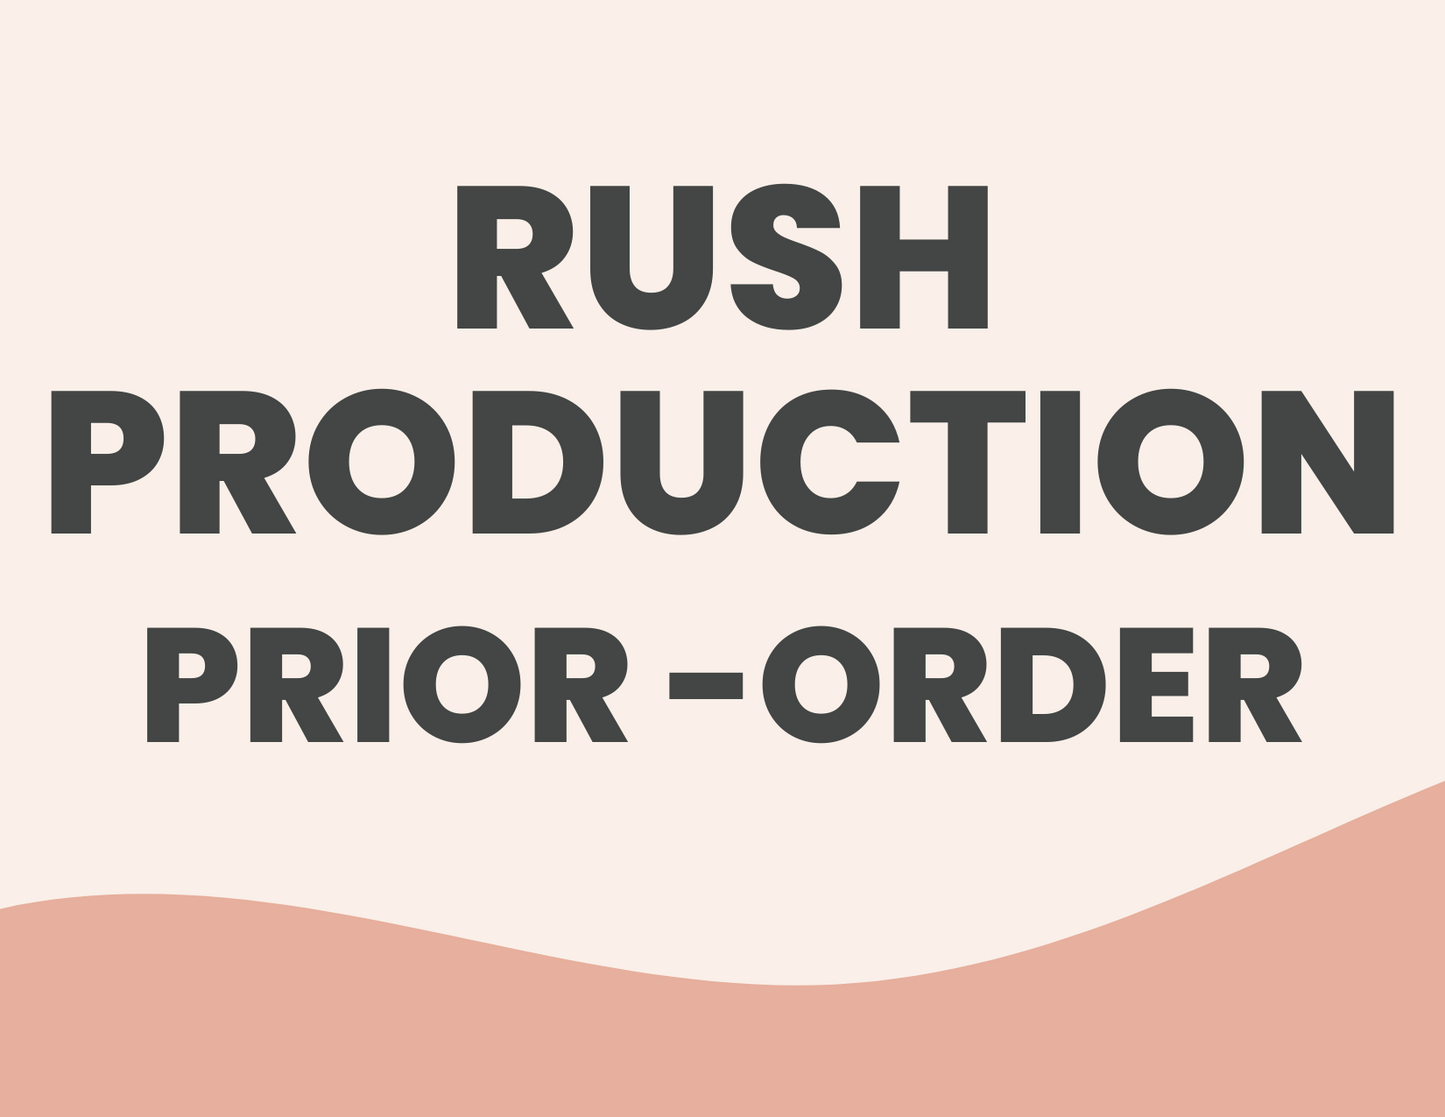 RUSH PRODUCTION *PRIOR ORDER* - 1-3 BUSINESS DAYS